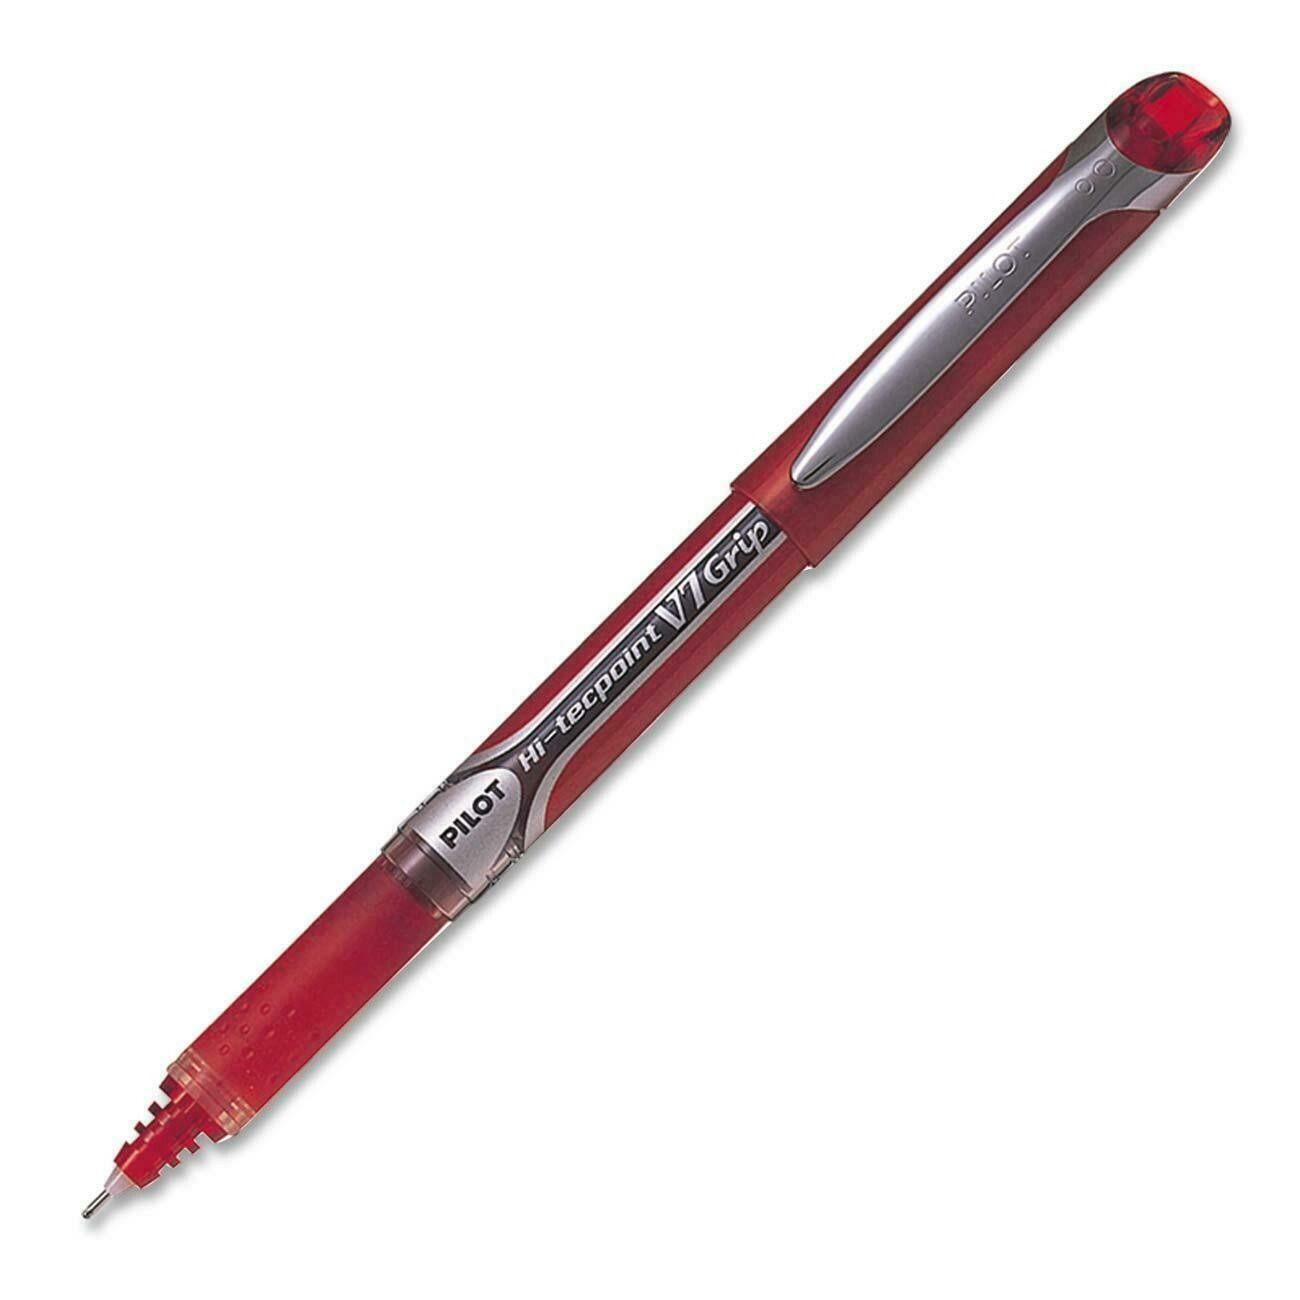 Pen, Needle Point Rollerball, Hi-Tecpoint V7 Red, Single, 0.7 Mm